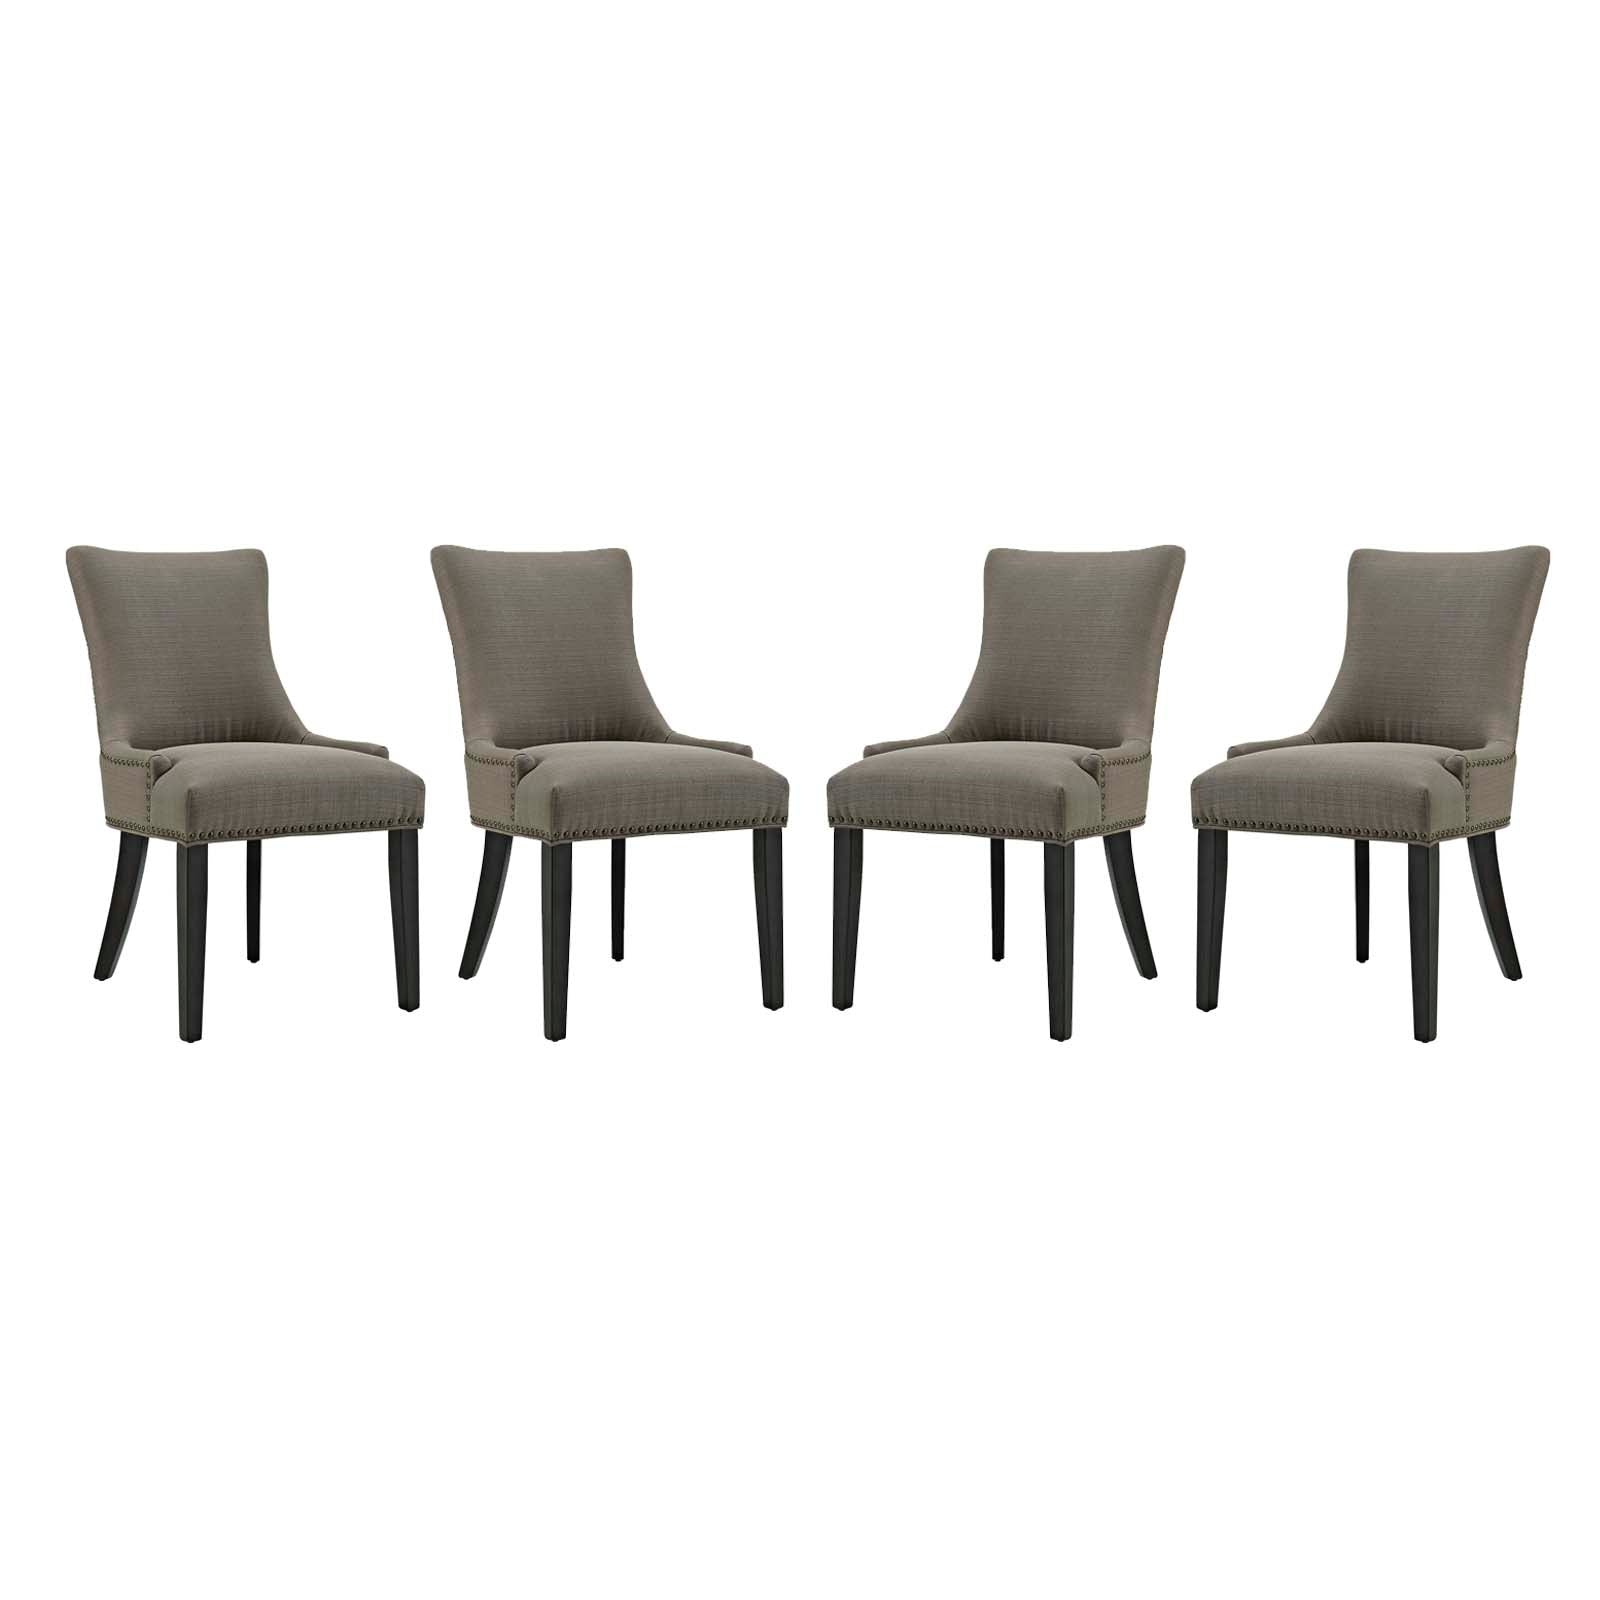 Modway Dining Chairs - Marquis Dining Chair Fabric Granite (Set of 4)